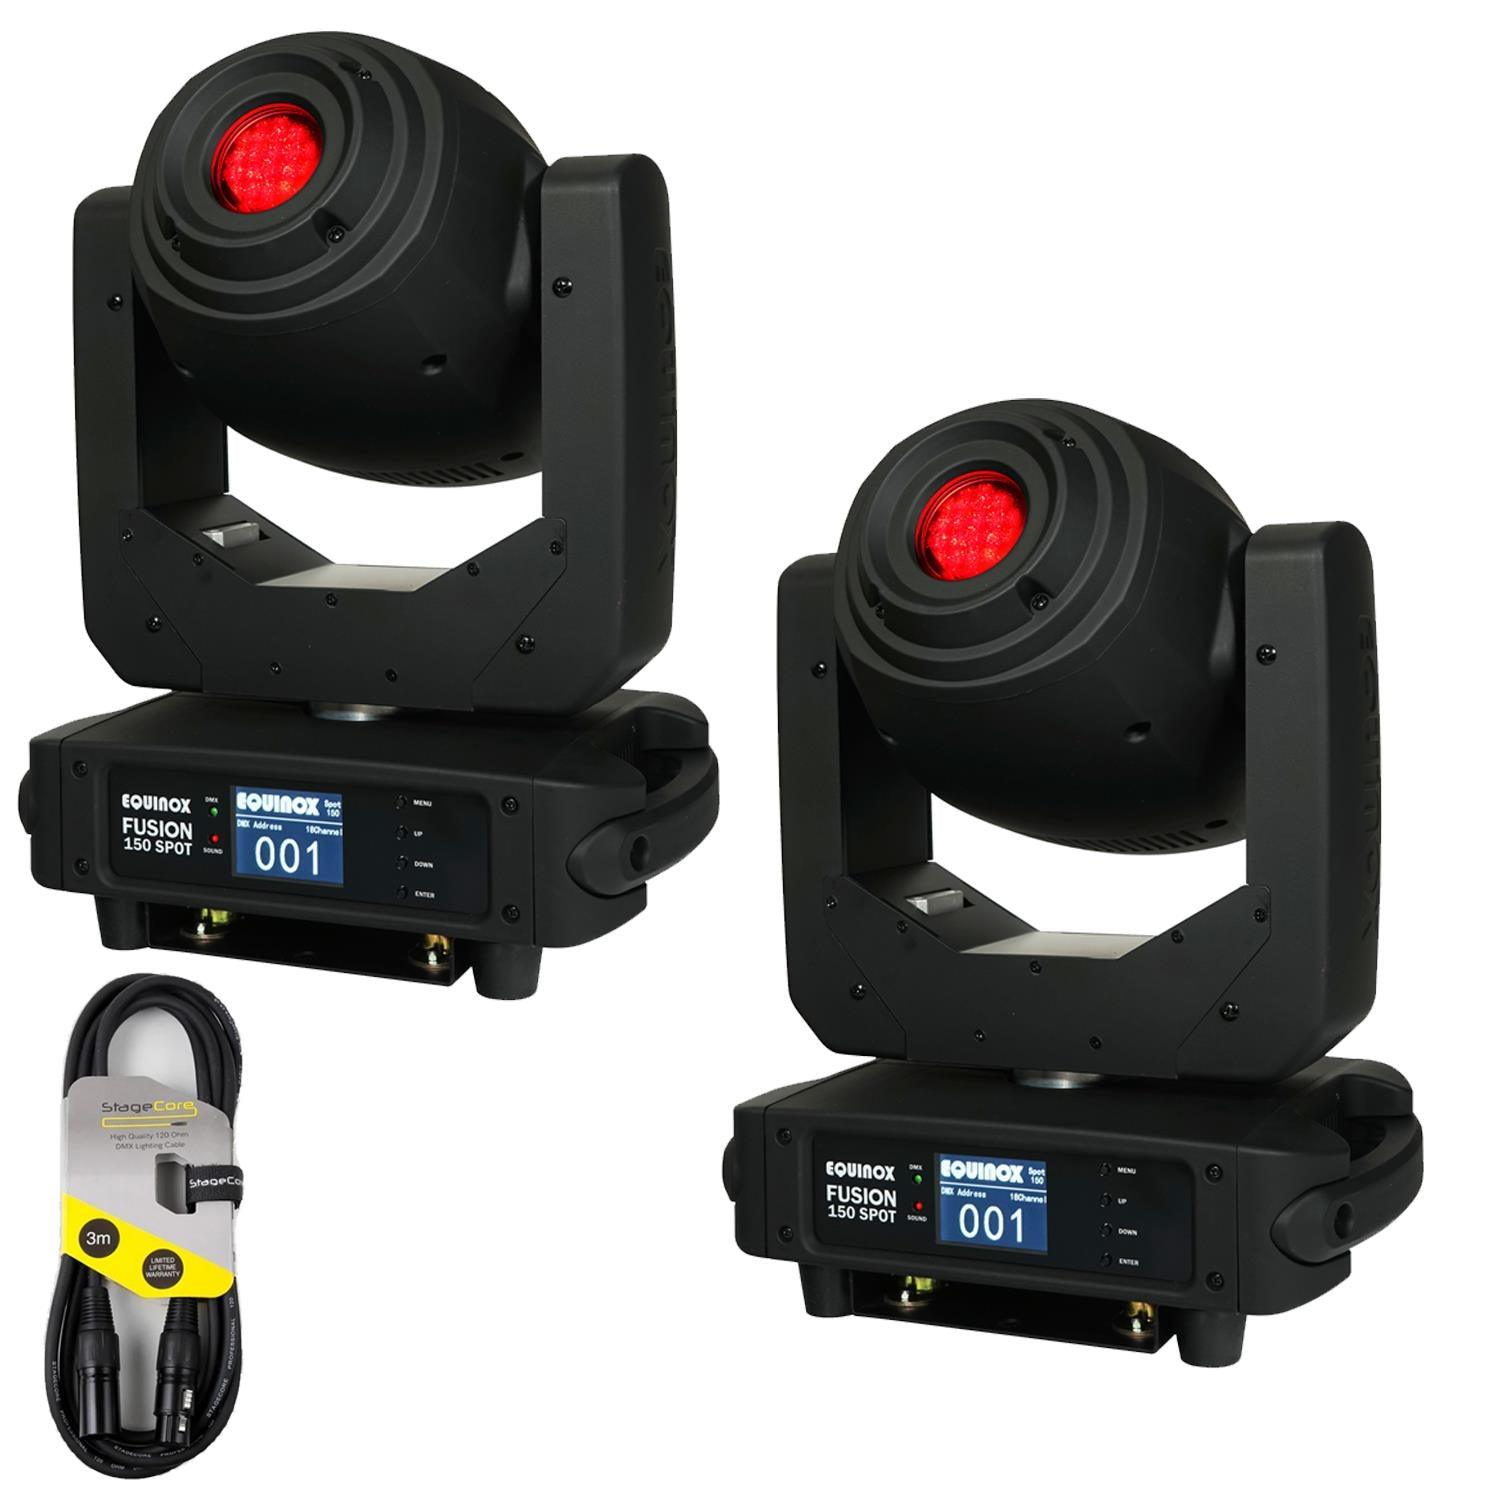 2 x Equinox Fusion 150 Spot Moving Head with DMX Cable - DY Pro Audio